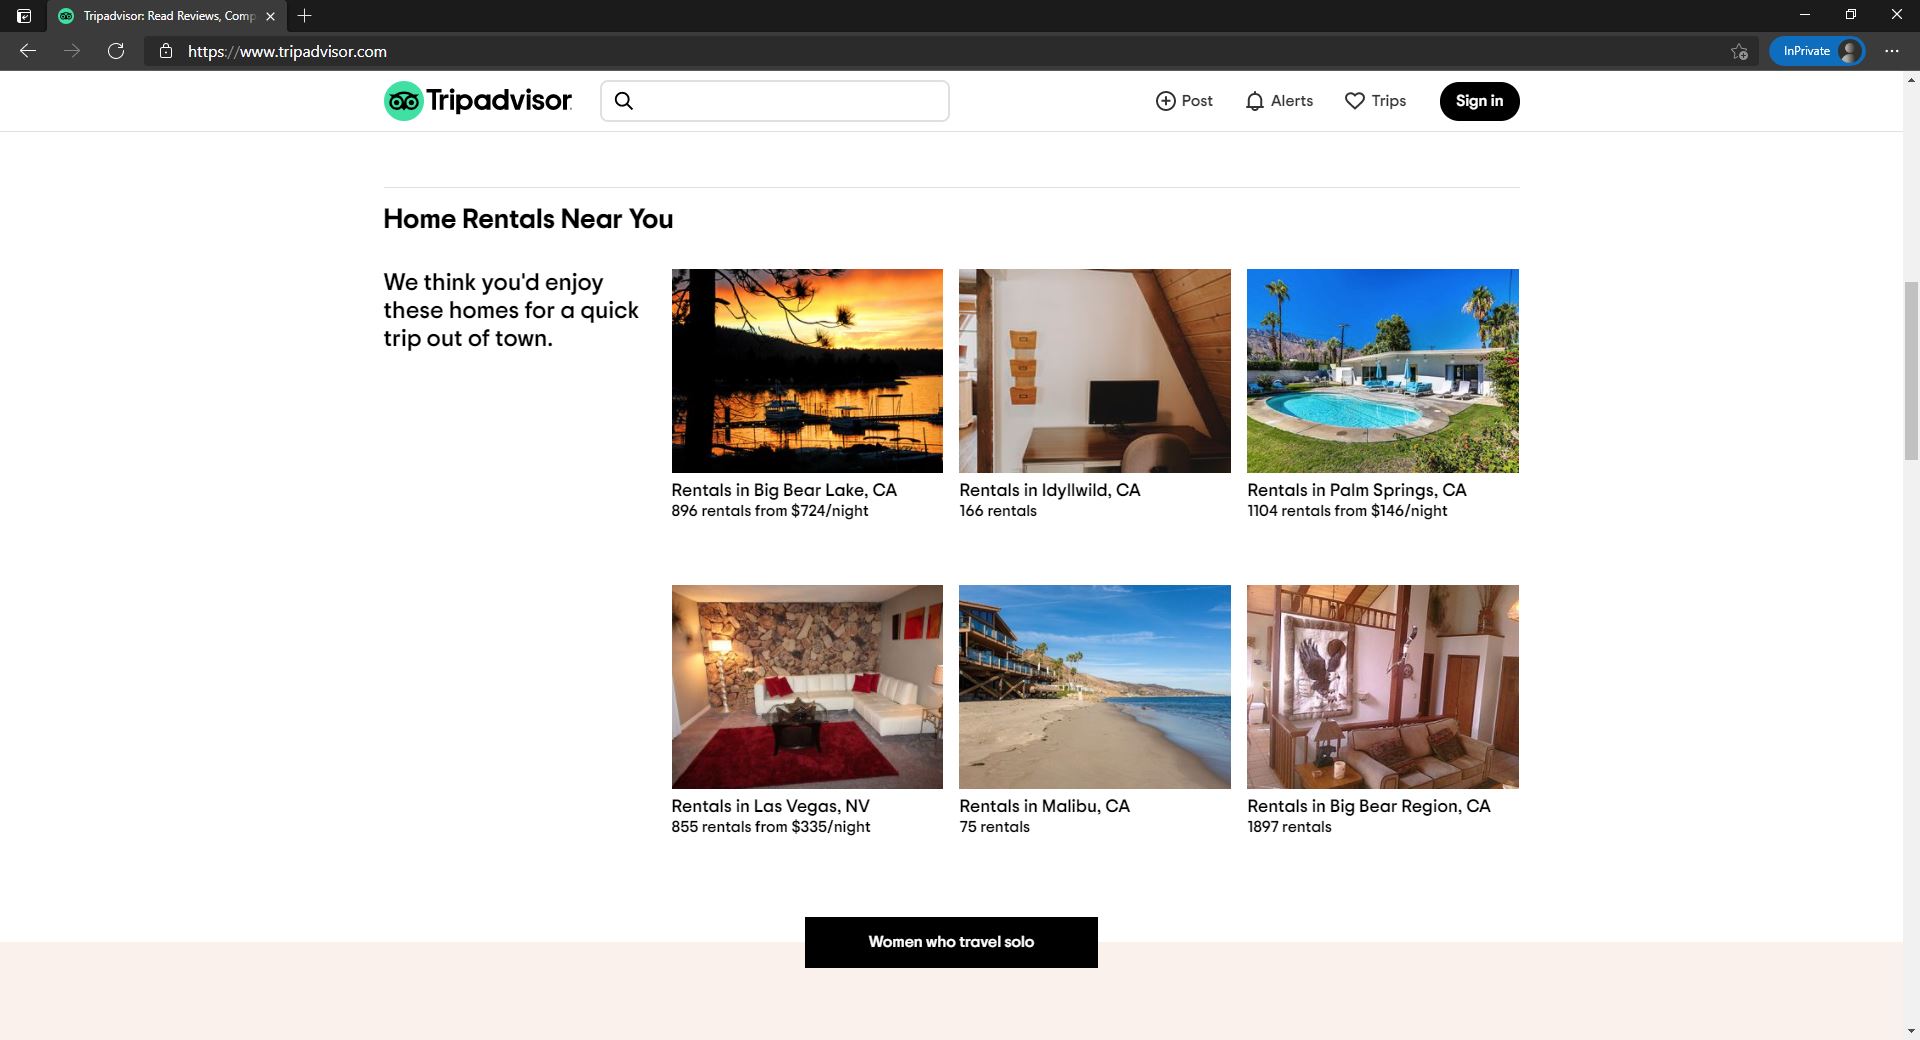 TripAdvisor website homepage with attraction points